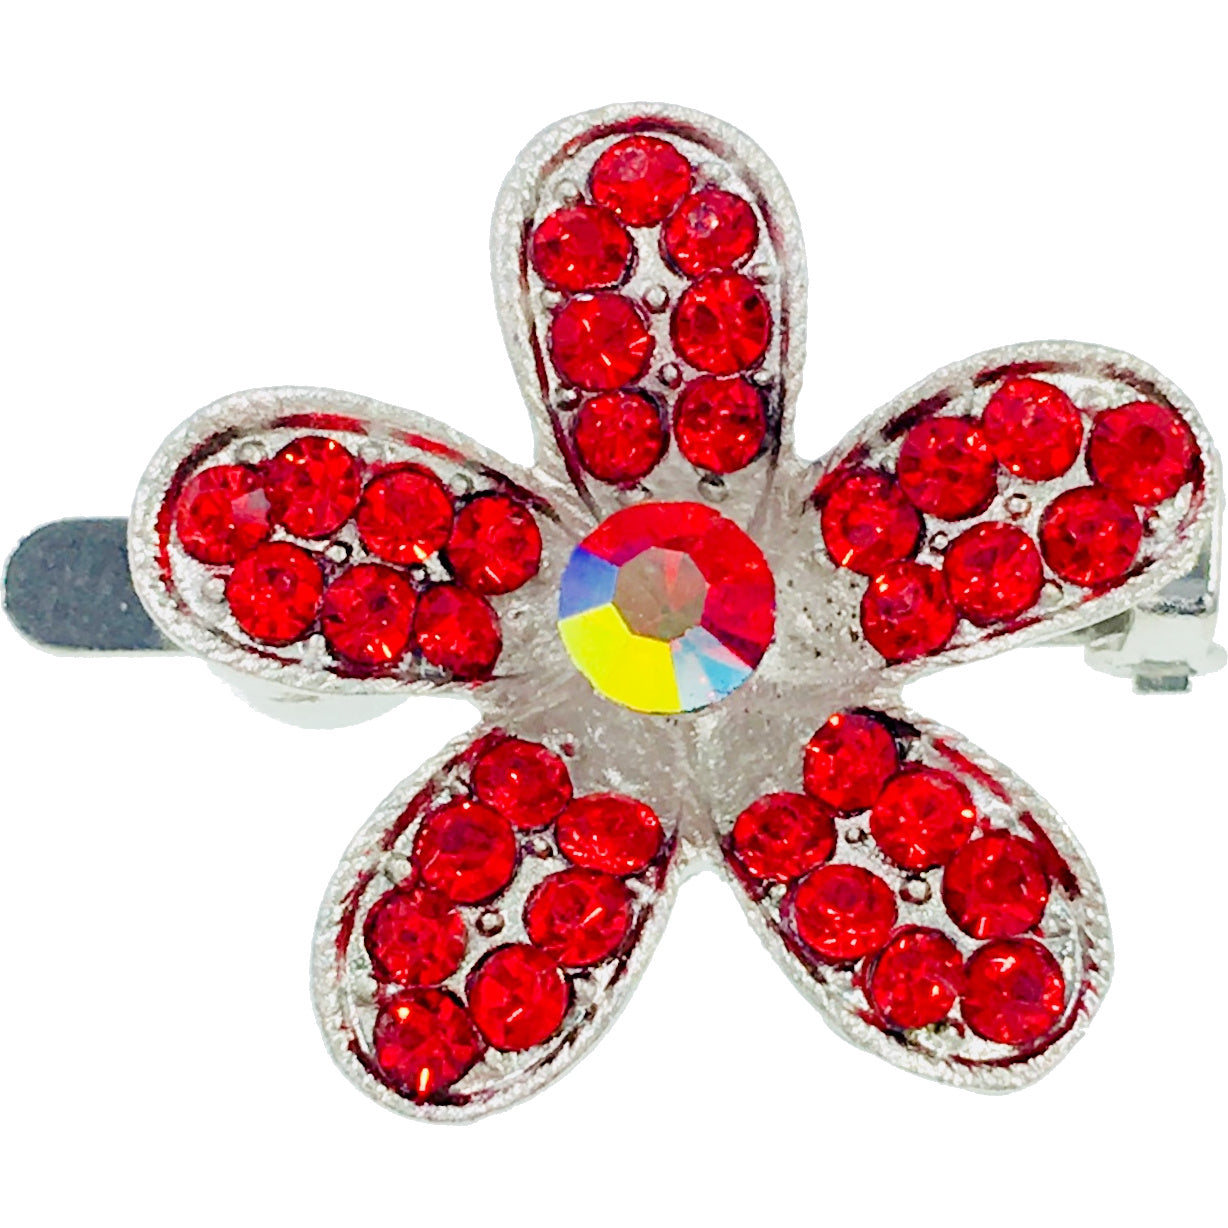 Buttercup Flower Magnetic Hair Clip use Rhinestone Crystal silver base AB Pink Red Purple Green Blue Brown, Magnetic Clip - MOGHANT